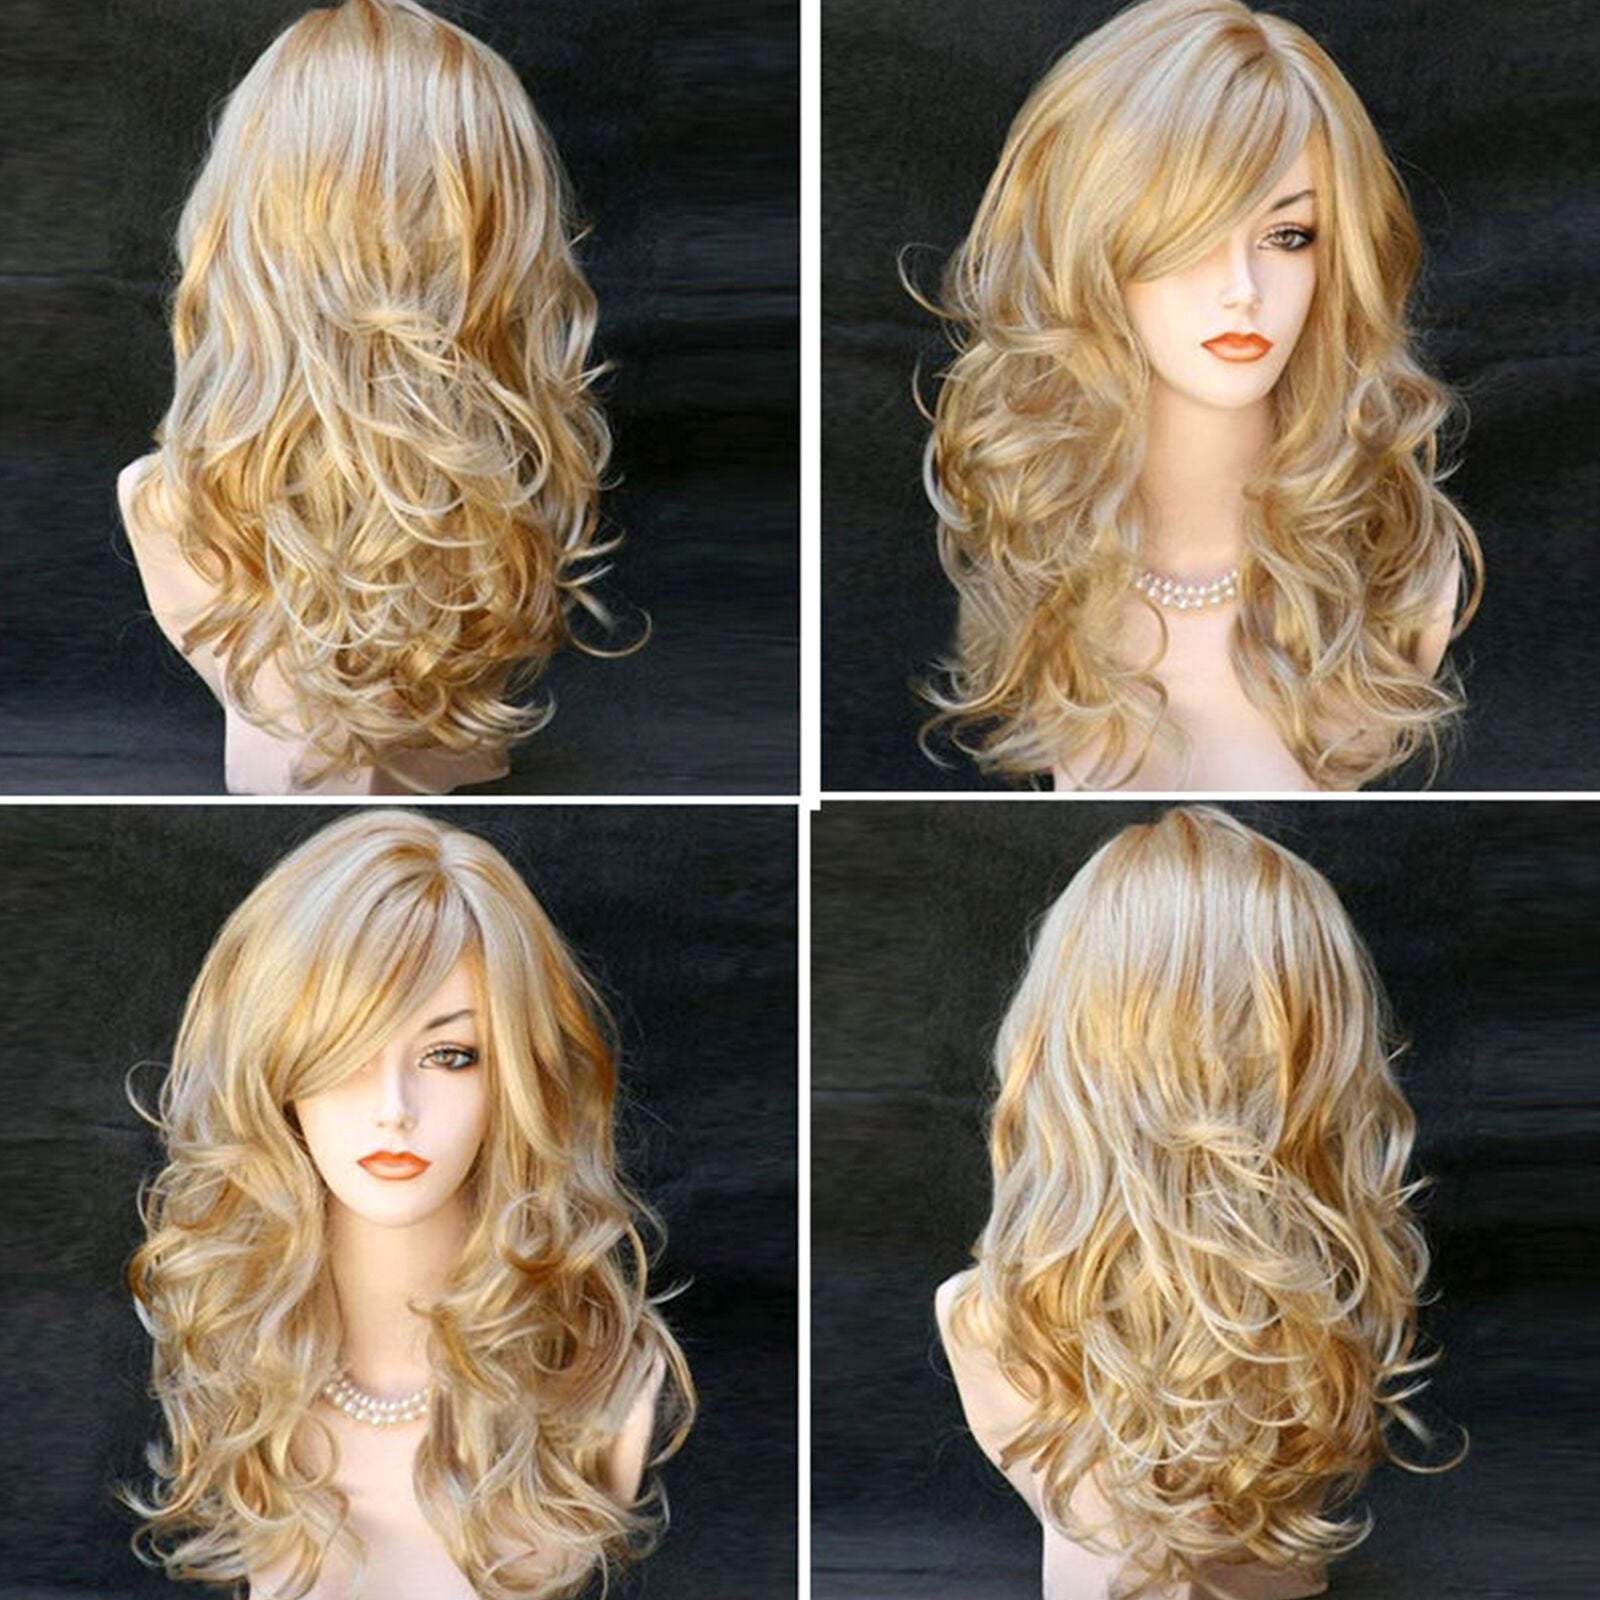 23" Women's Heat Resistant Hair Blonde Middle Long Curly Full Wig + Wig Cap